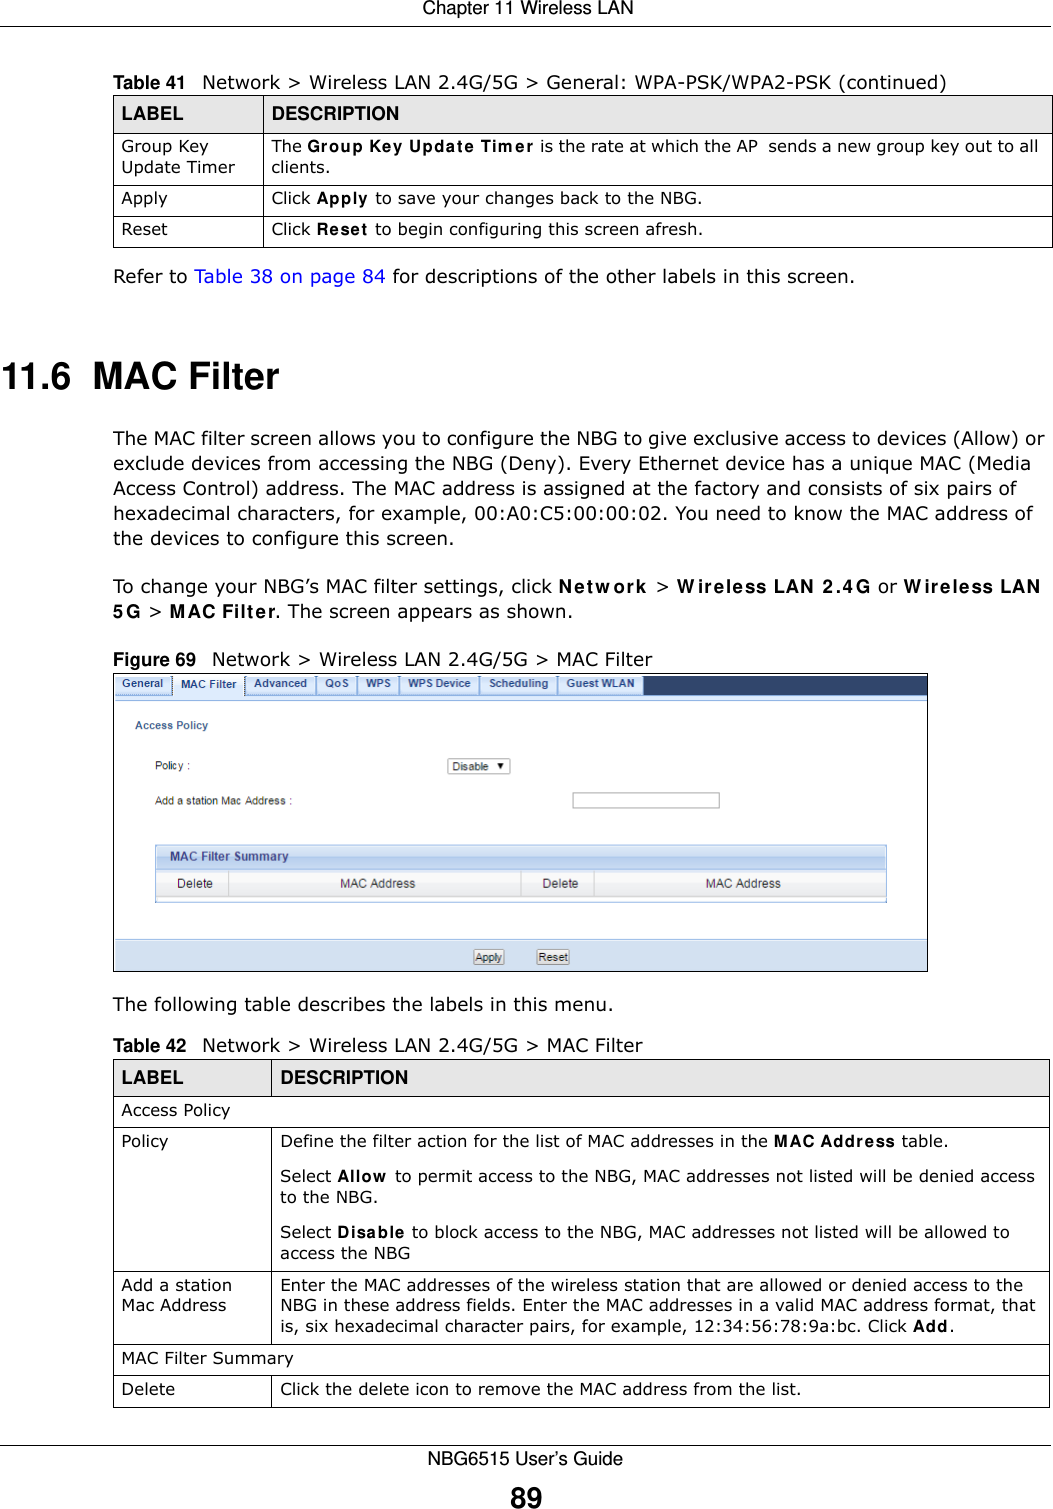  Chapter 11 Wireless LANNBG6515 User’s Guide89Refer to Table 38 on page 84 for descriptions of the other labels in this screen.11.6  MAC FilterThe MAC filter screen allows you to configure the NBG to give exclusive access to devices (Allow) or exclude devices from accessing the NBG (Deny). Every Ethernet device has a unique MAC (Media Access Control) address. The MAC address is assigned at the factory and consists of six pairs of hexadecimal characters, for example, 00:A0:C5:00:00:02. You need to know the MAC address of the devices to configure this screen.To change your NBG’s MAC filter settings, click Network &gt; Wireless LAN 2.4G or Wireless LAN 5G &gt; MAC Filter. The screen appears as shown.Figure 69   Network &gt; Wireless LAN 2.4G/5G &gt; MAC FilterThe following table describes the labels in this menu.Group Key Update TimerThe Group Key Update Timer is the rate at which the AP  sends a new group key out to all clients. Apply Click Apply to save your changes back to the NBG.Reset Click Reset to begin configuring this screen afresh.Table 41   Network &gt; Wireless LAN 2.4G/5G &gt; General: WPA-PSK/WPA2-PSK (continued)LABEL DESCRIPTIONTable 42   Network &gt; Wireless LAN 2.4G/5G &gt; MAC FilterLABEL DESCRIPTIONAccess PolicyPolicy  Define the filter action for the list of MAC addresses in the MAC Address table. Select Allow to permit access to the NBG, MAC addresses not listed will be denied access to the NBG. Select Disable to block access to the NBG, MAC addresses not listed will be allowed to access the NBG Add a station Mac AddressEnter the MAC addresses of the wireless station that are allowed or denied access to the NBG in these address fields. Enter the MAC addresses in a valid MAC address format, that is, six hexadecimal character pairs, for example, 12:34:56:78:9a:bc. Click Add.MAC Filter SummaryDelete Click the delete icon to remove the MAC address from the list.